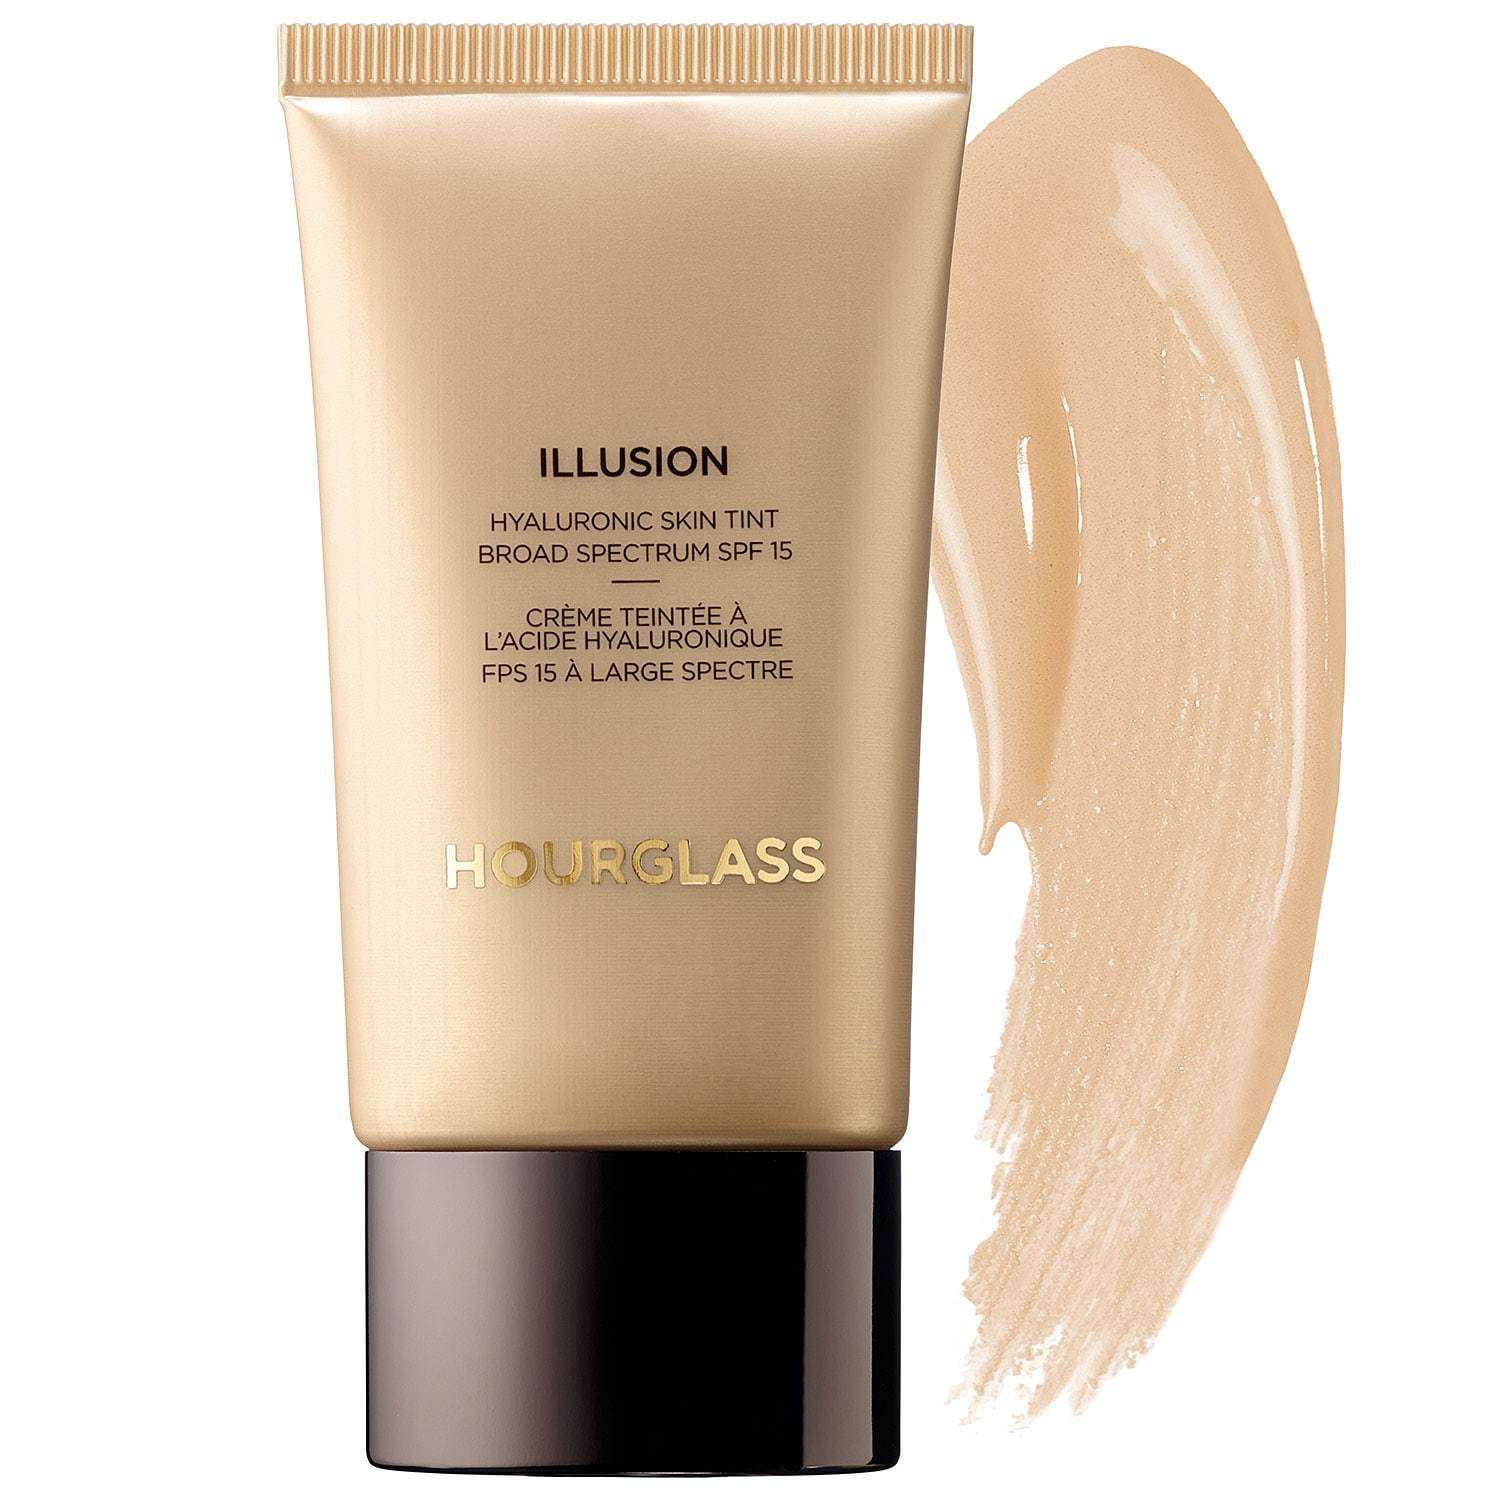 Hourglass Illusion Hyaluronic Skin Tint Ivory